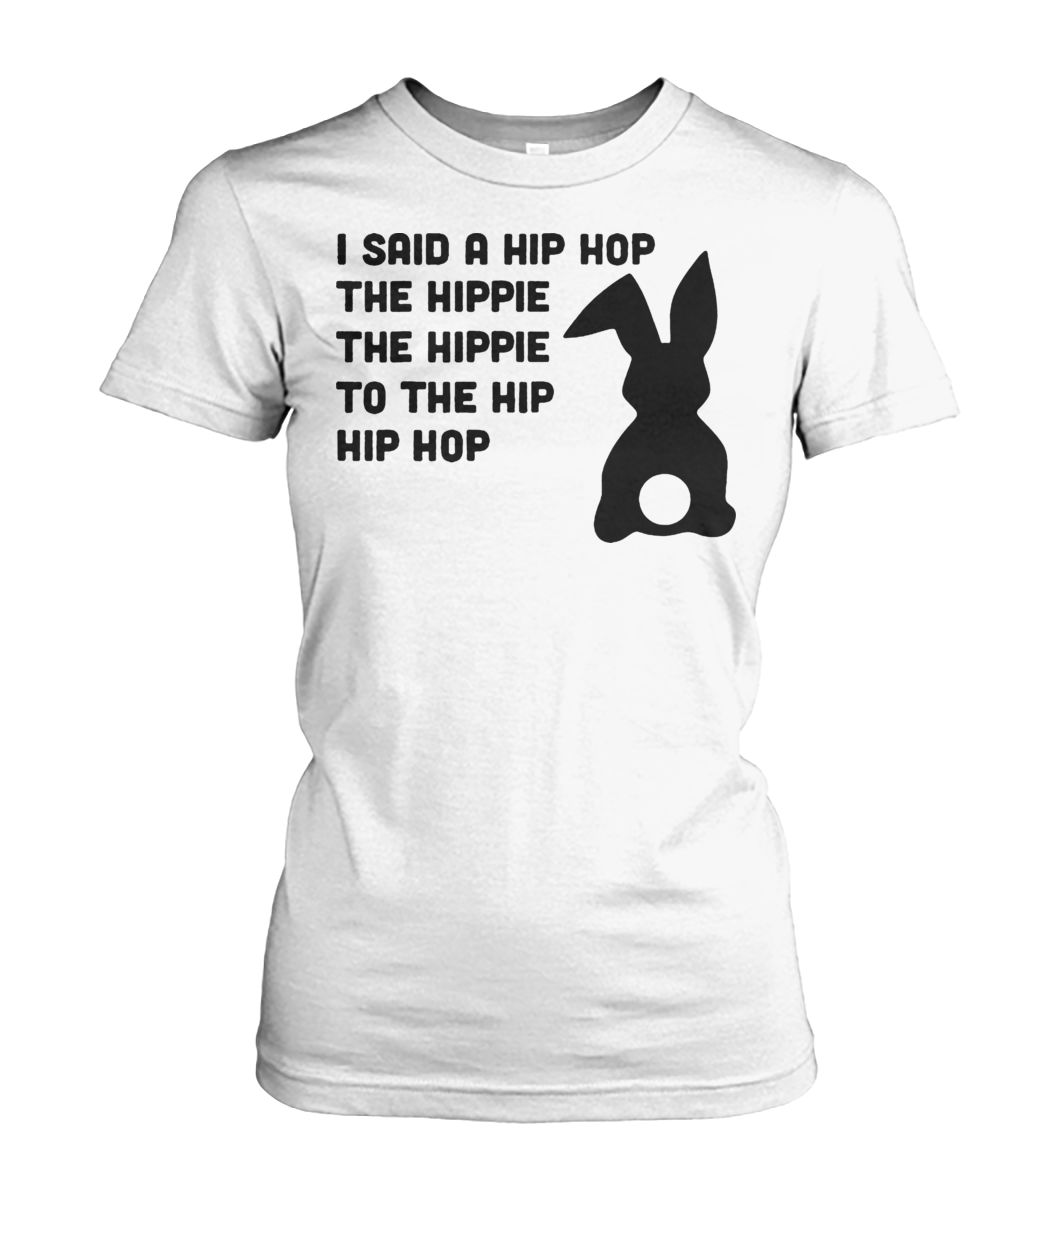 Easter I said a hip hop the hippie to the hip hip hop women's crew tee